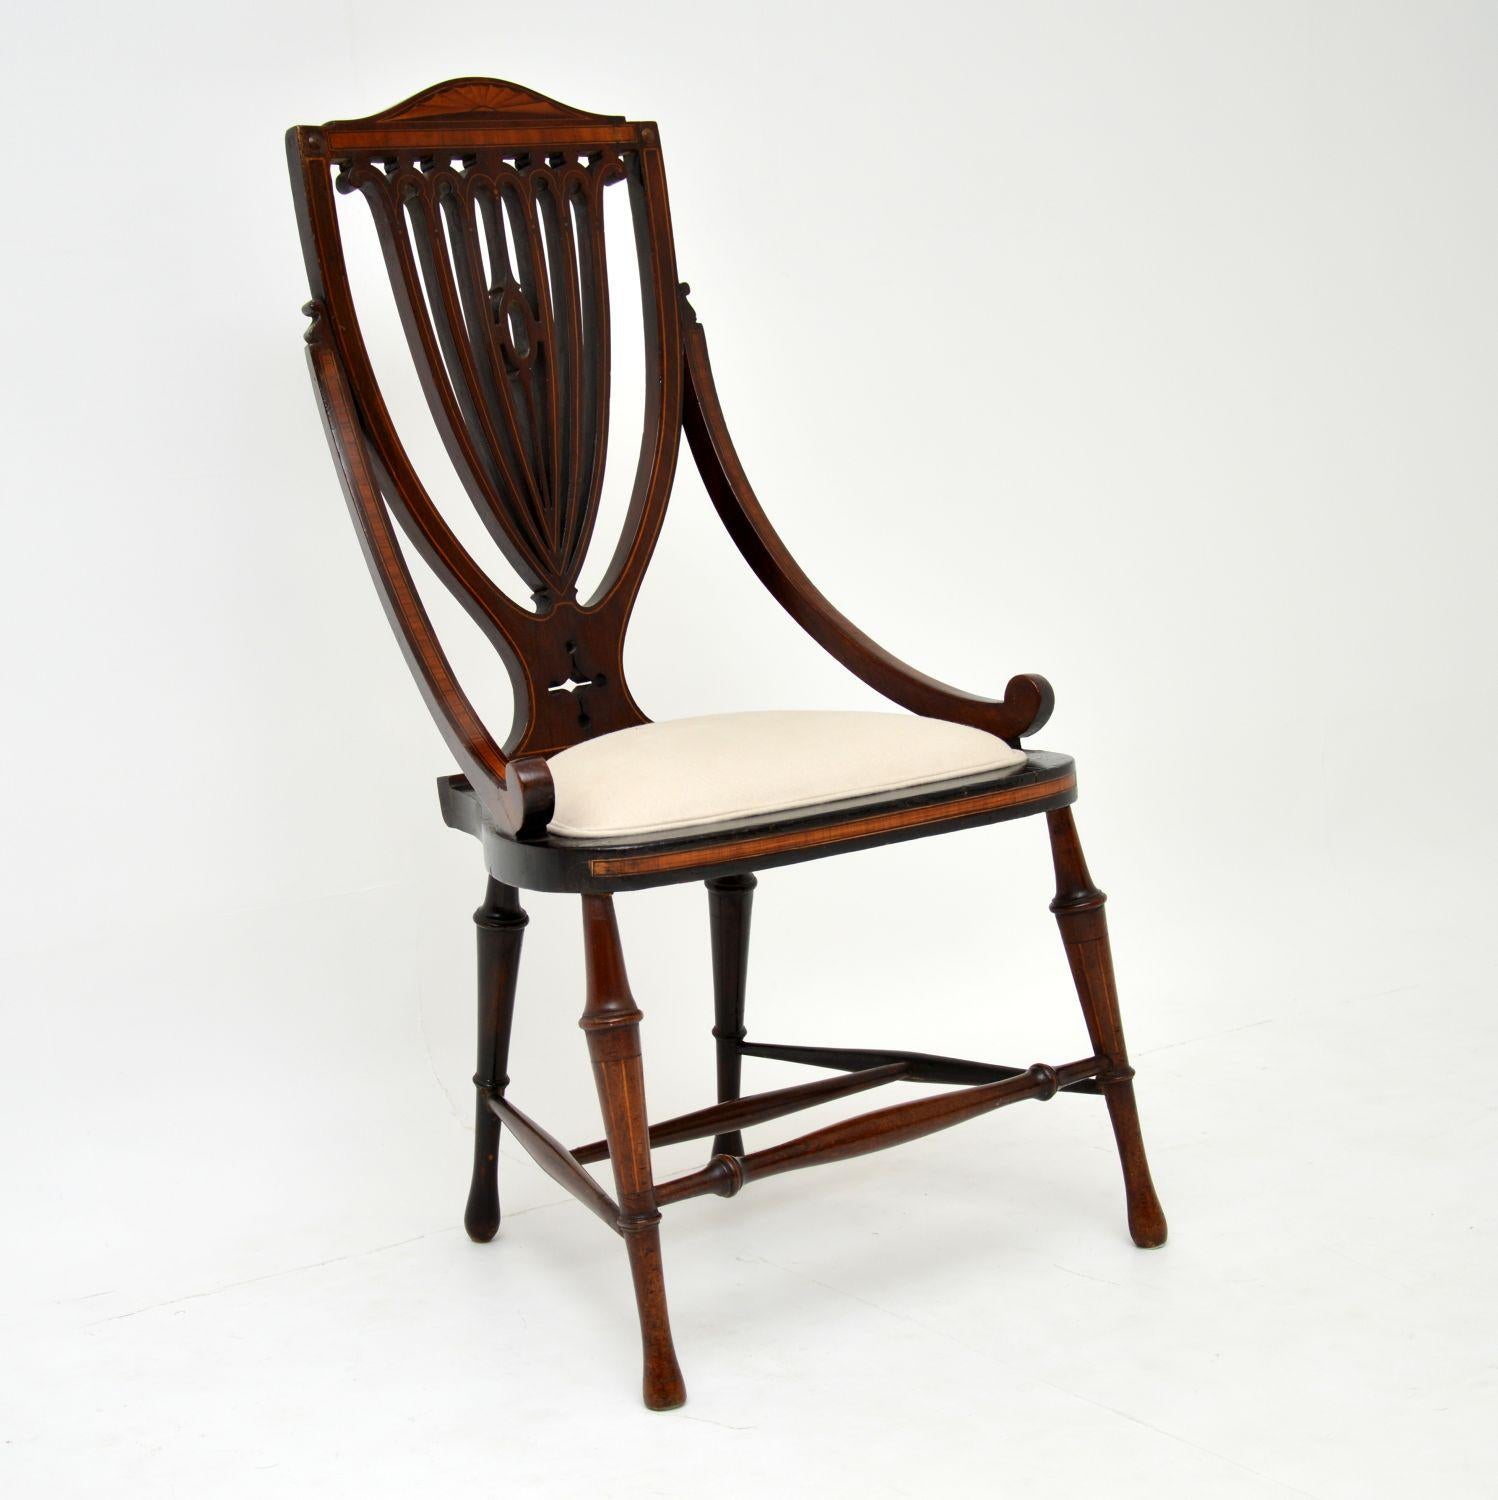 This antique Edwardian mahogany side chair has some wonderful features and exquisite decoration.

It’s in very good original condition, having just been French polished and re-upholstered in our regular cream natural cotton fabric. The seat area